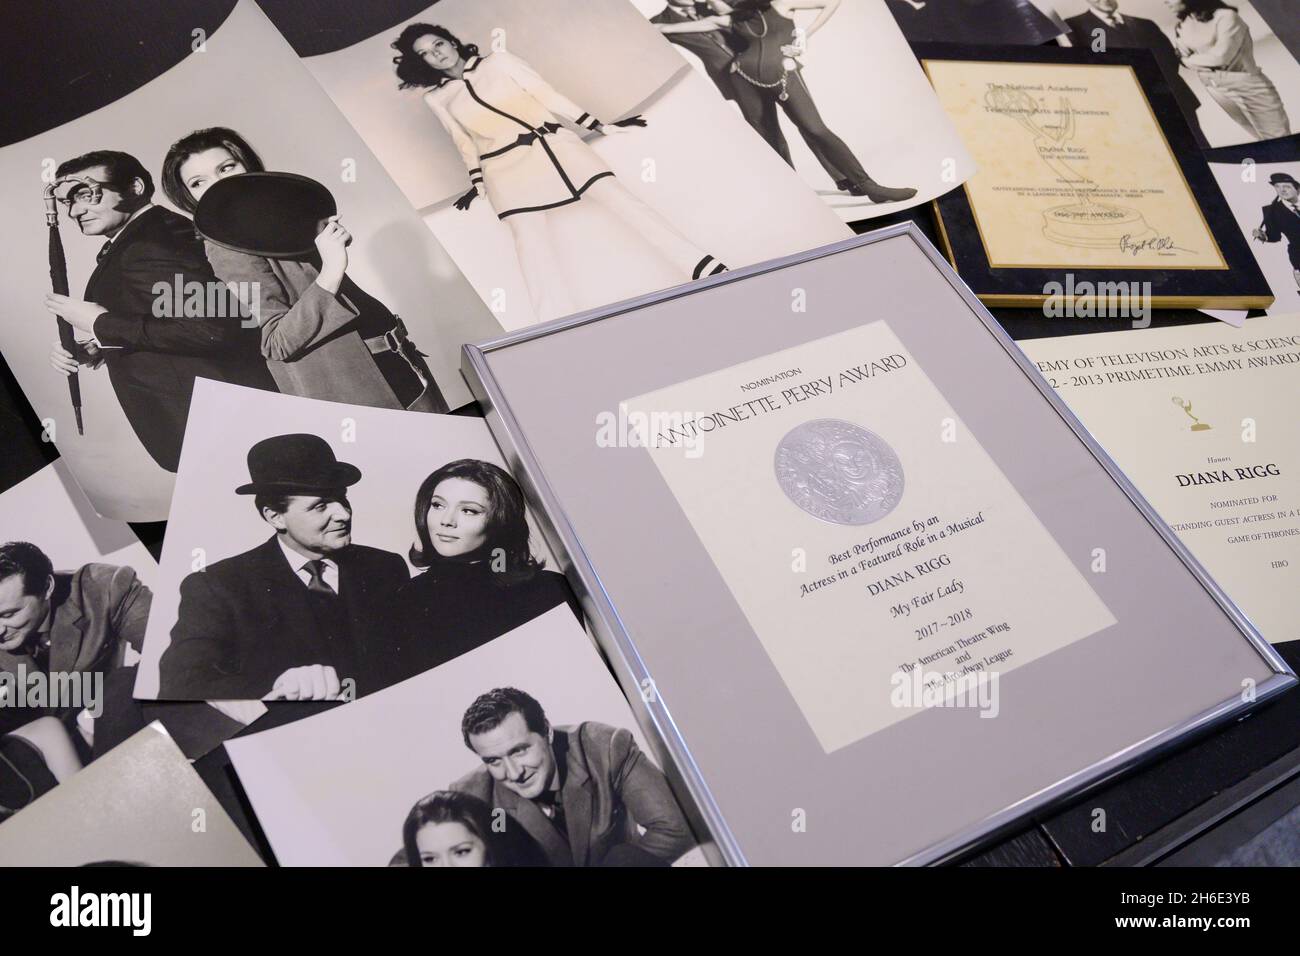 Bonhams, Knightsbridge, London, UK. 15 November 2021. Film, Rock & pop including property from the Estate of Dame Diana Rigg goes on sale at Bonhams on 17 November 2021. Image: The Avengers: A collection of vintage stills from The Avengers, 1960's, £1,000-2,000; (foreground) Diana Rigg: A Tony Award Nomination Certificate for My Fair Lady, 2018, £1,000-2,000. Credit: Malcolm Park/Alamy Live News. Stock Photo